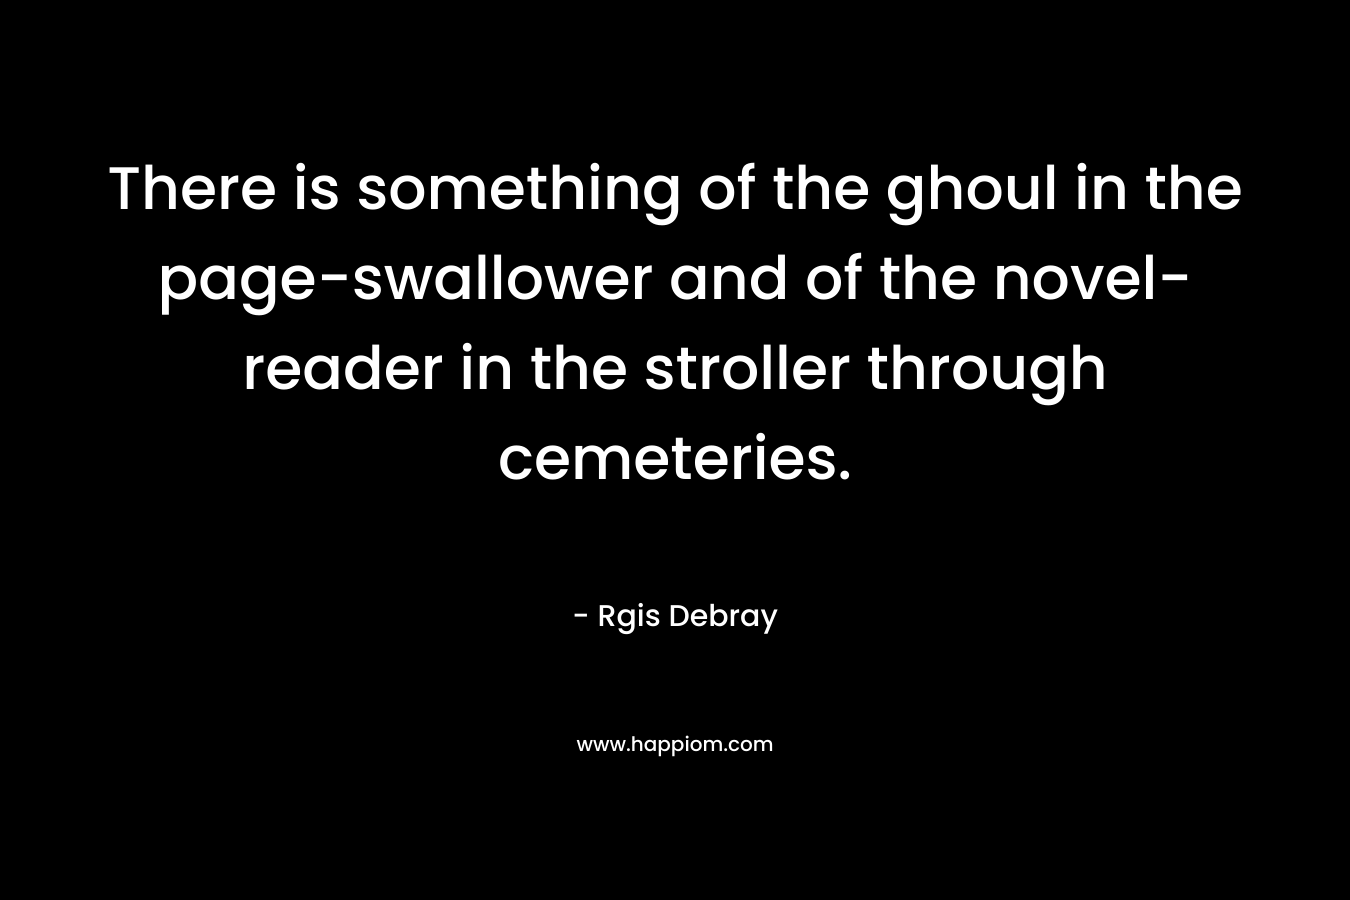 There is something of the ghoul in the page-swallower and of the novel-reader in the stroller through cemeteries. – Rgis Debray